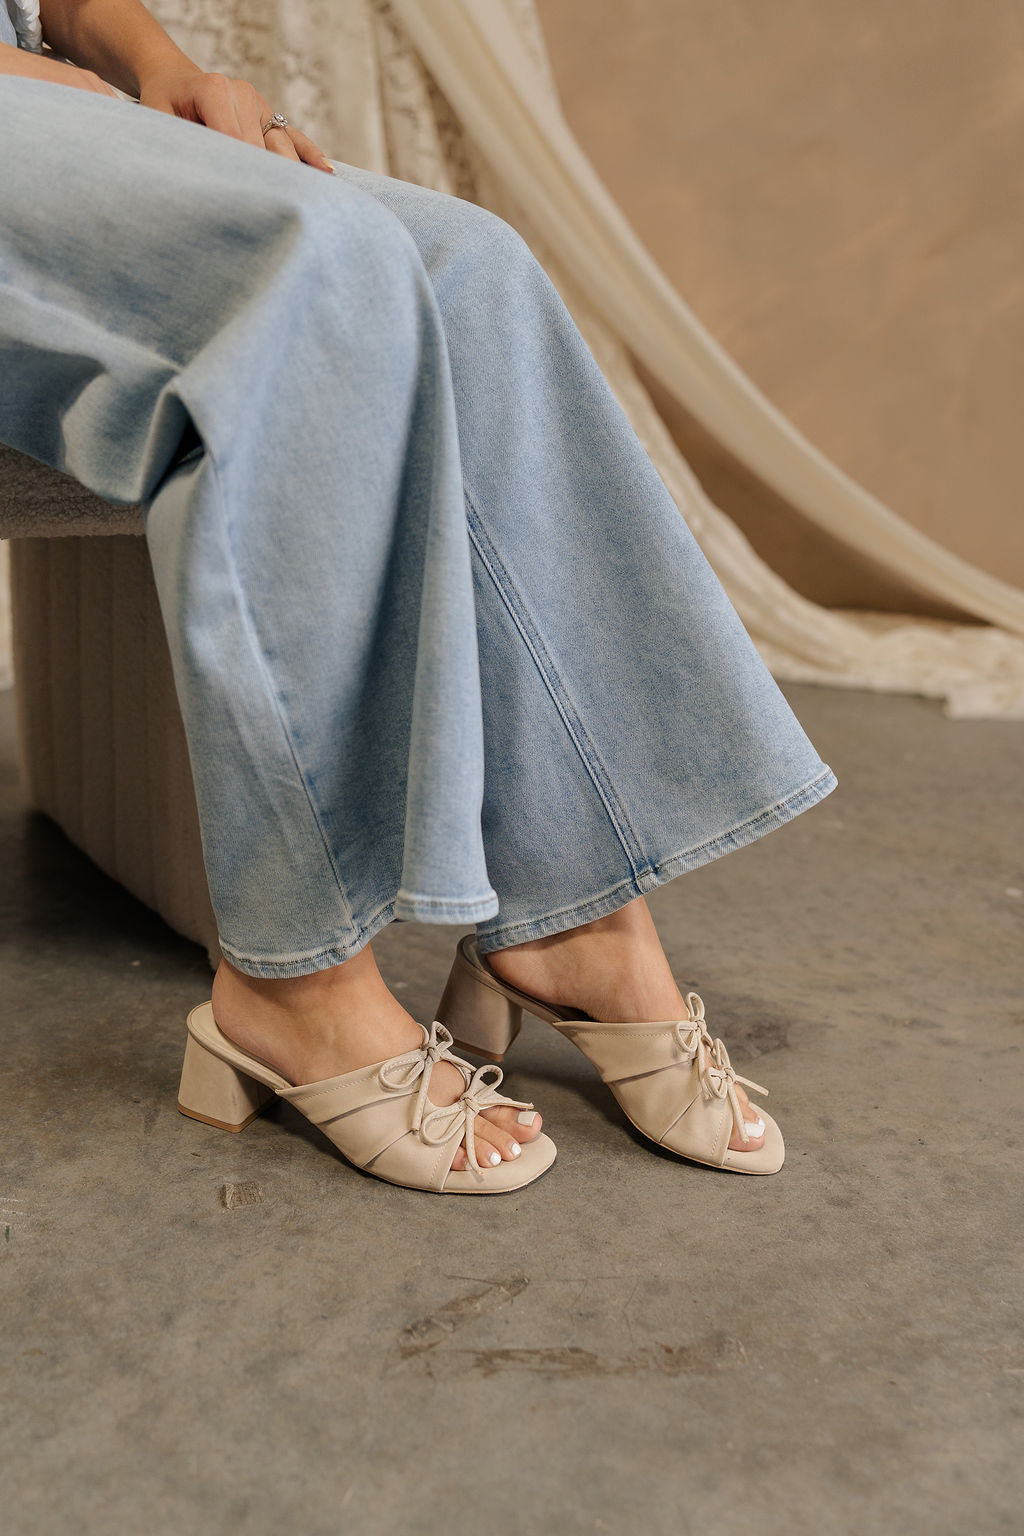 Side view of female model sitting; her legs are shown in jeans and the Emerald Light Grey Bow Ties Heel Sandal which features grey suede material, 2.5" block heels, backless slide entry, and ruched uppers with a cutout and bow details.